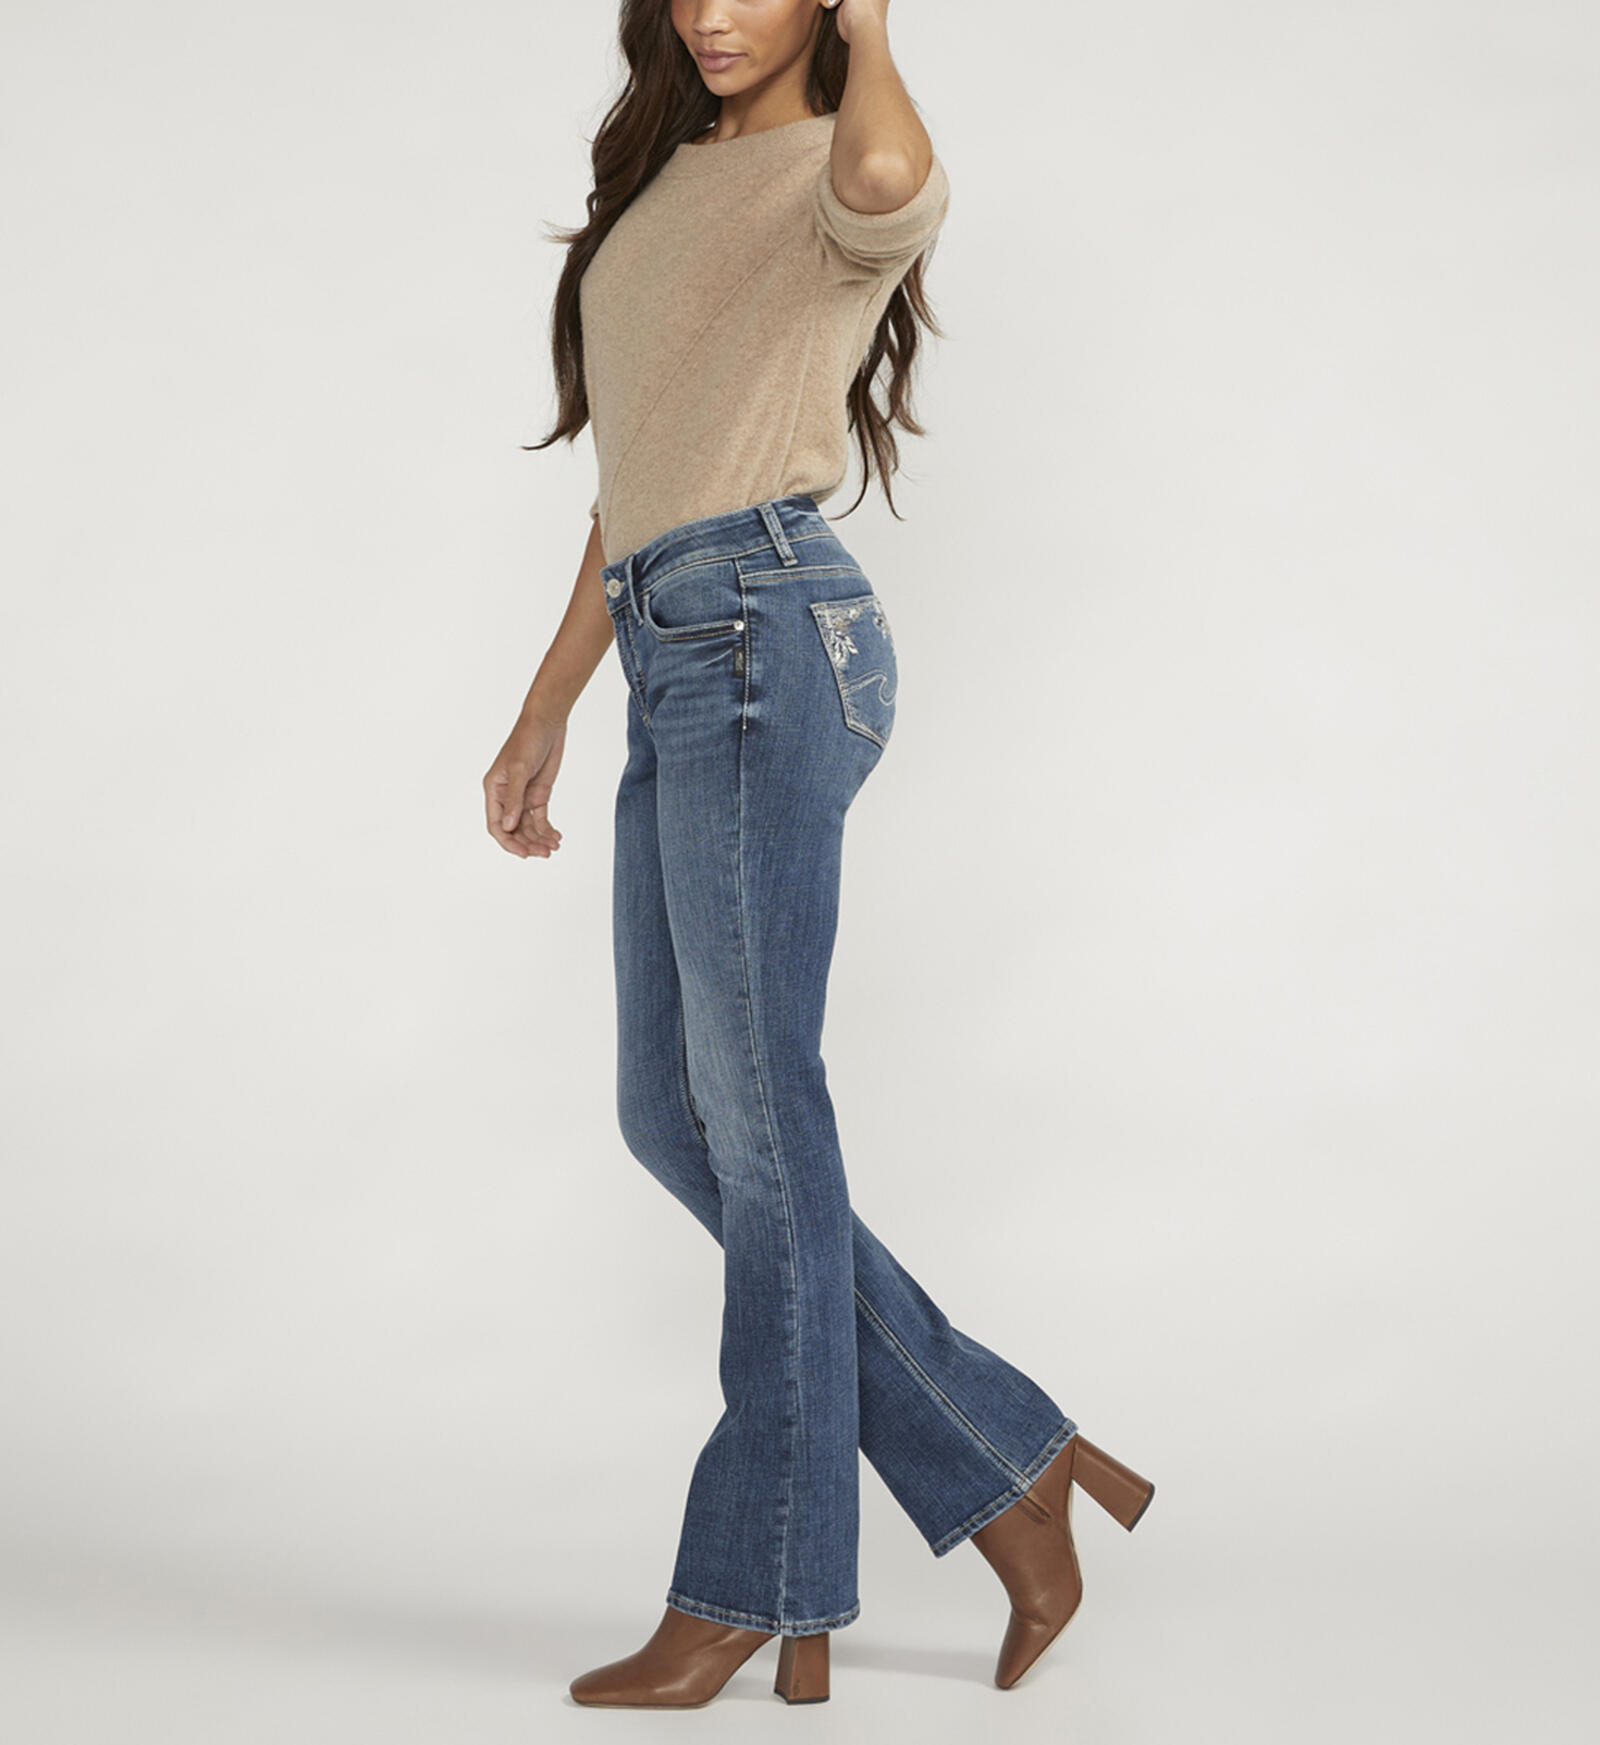 Buy Elyse Mid Rise Slim Bootcut Jeans Plus Size for USD 88.00